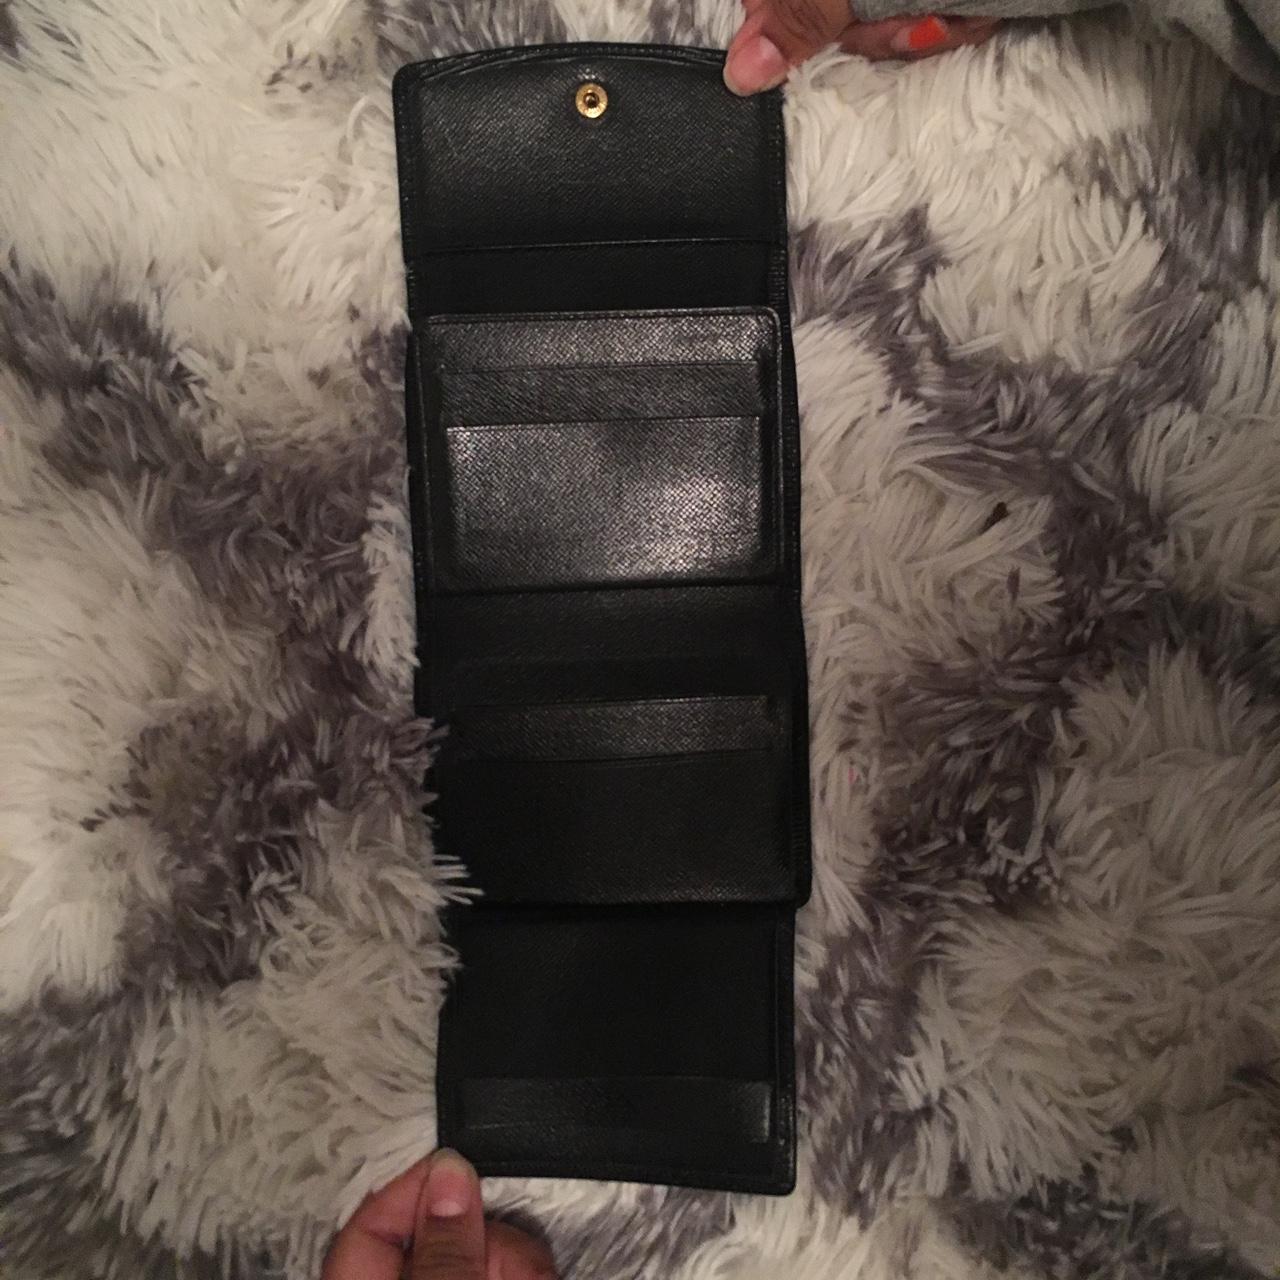 Louis Vuitton wallet Don't know the exact name of - Depop